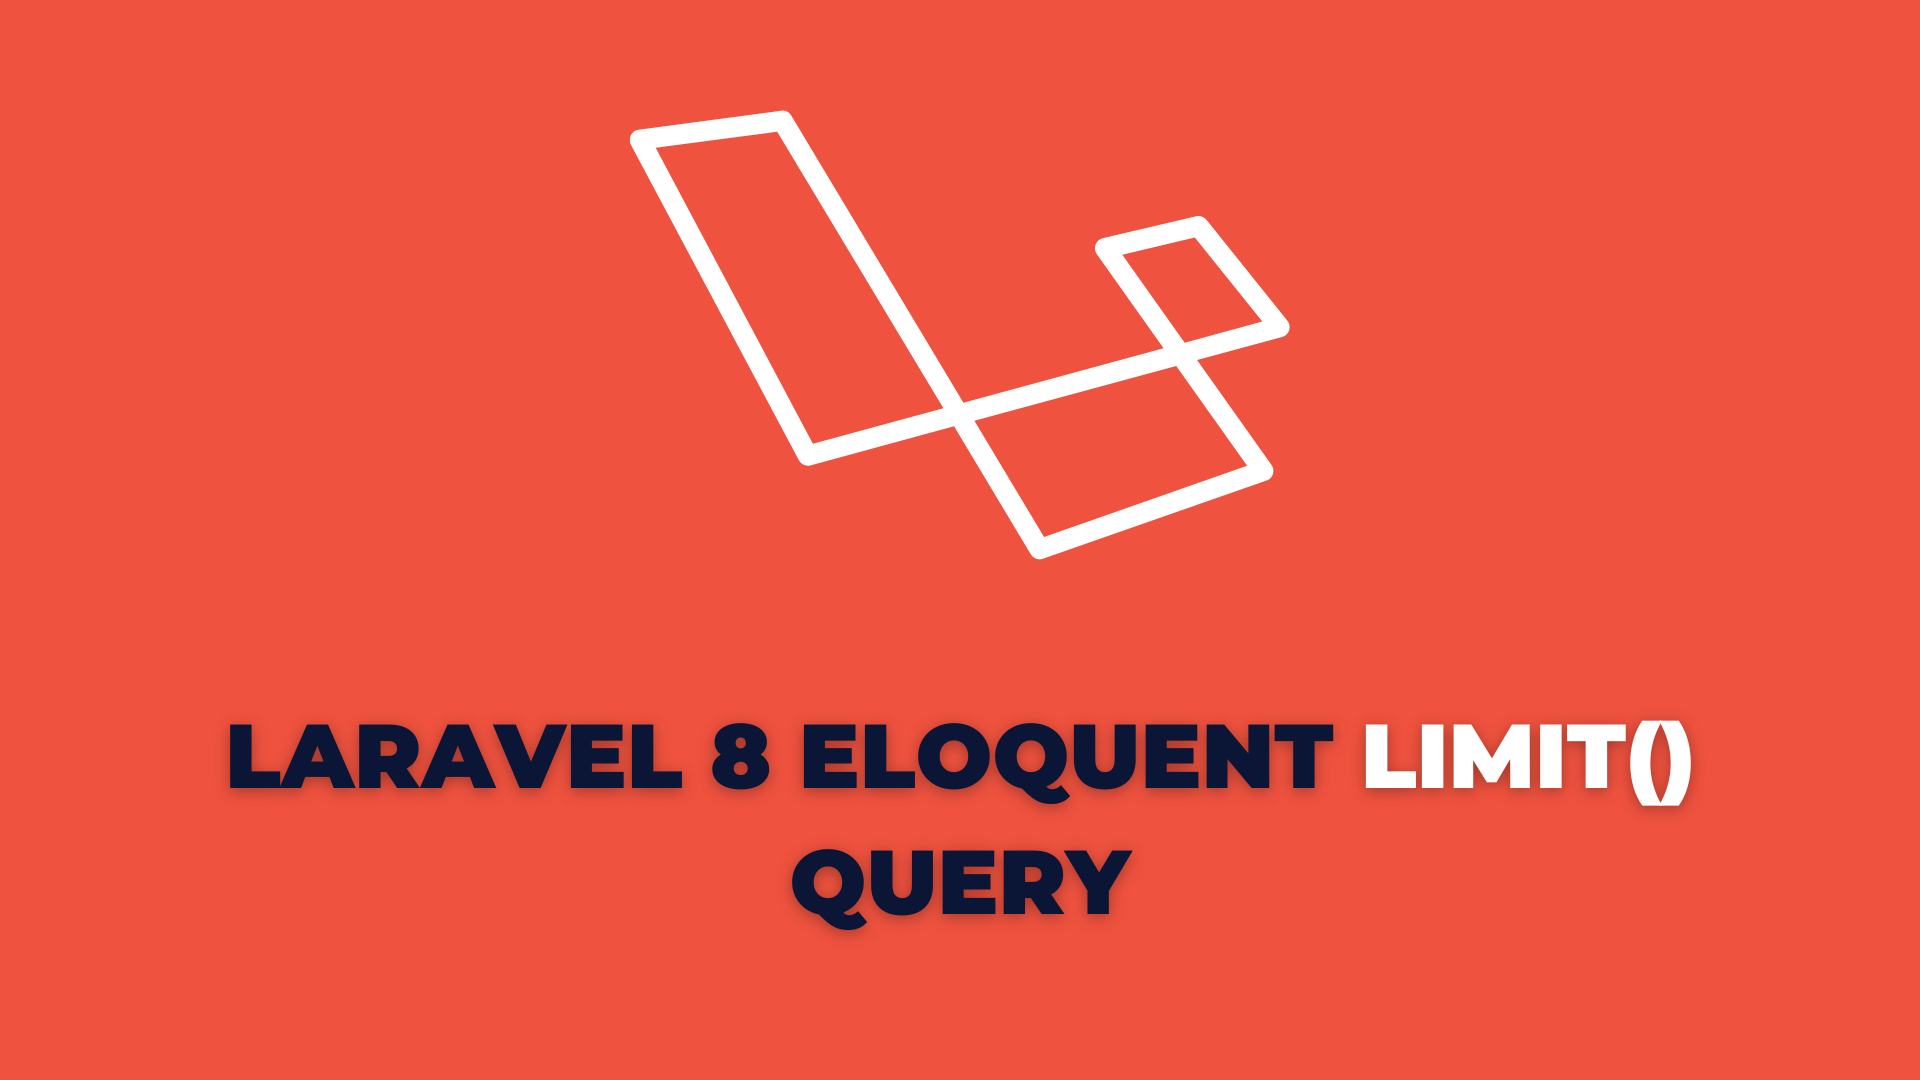 laravel eloquent create does not fill in properties